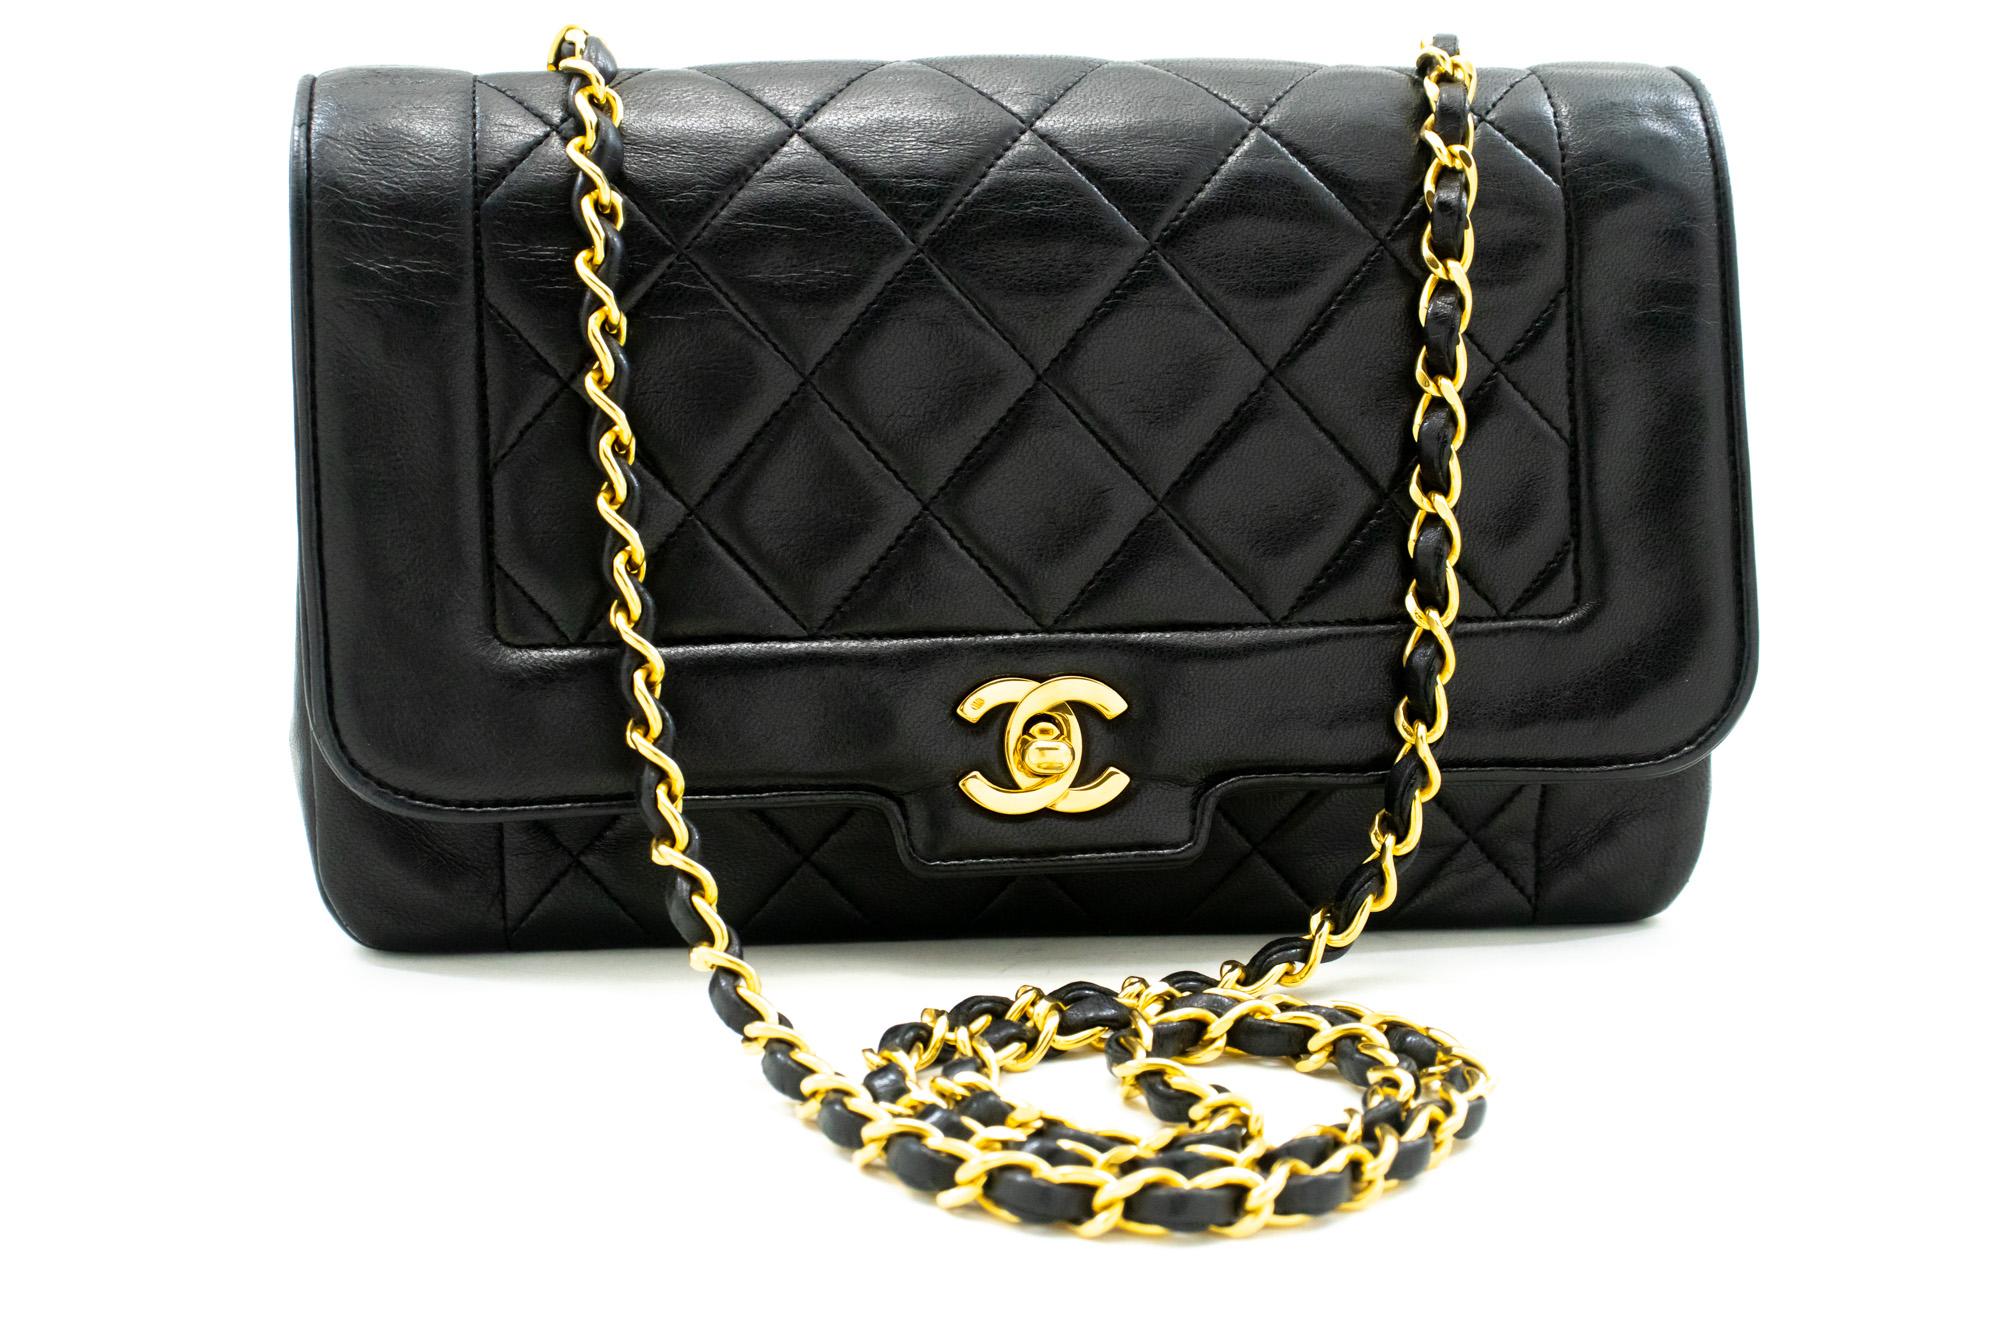 An authentic CHANEL Vintage Medium Chain Shoulder Bag Black made of black Lambskin Quilted. The color is Black. The outside material is Leather. The pattern is Solid. This item is Vintage / Classic. The year of manufacture would be